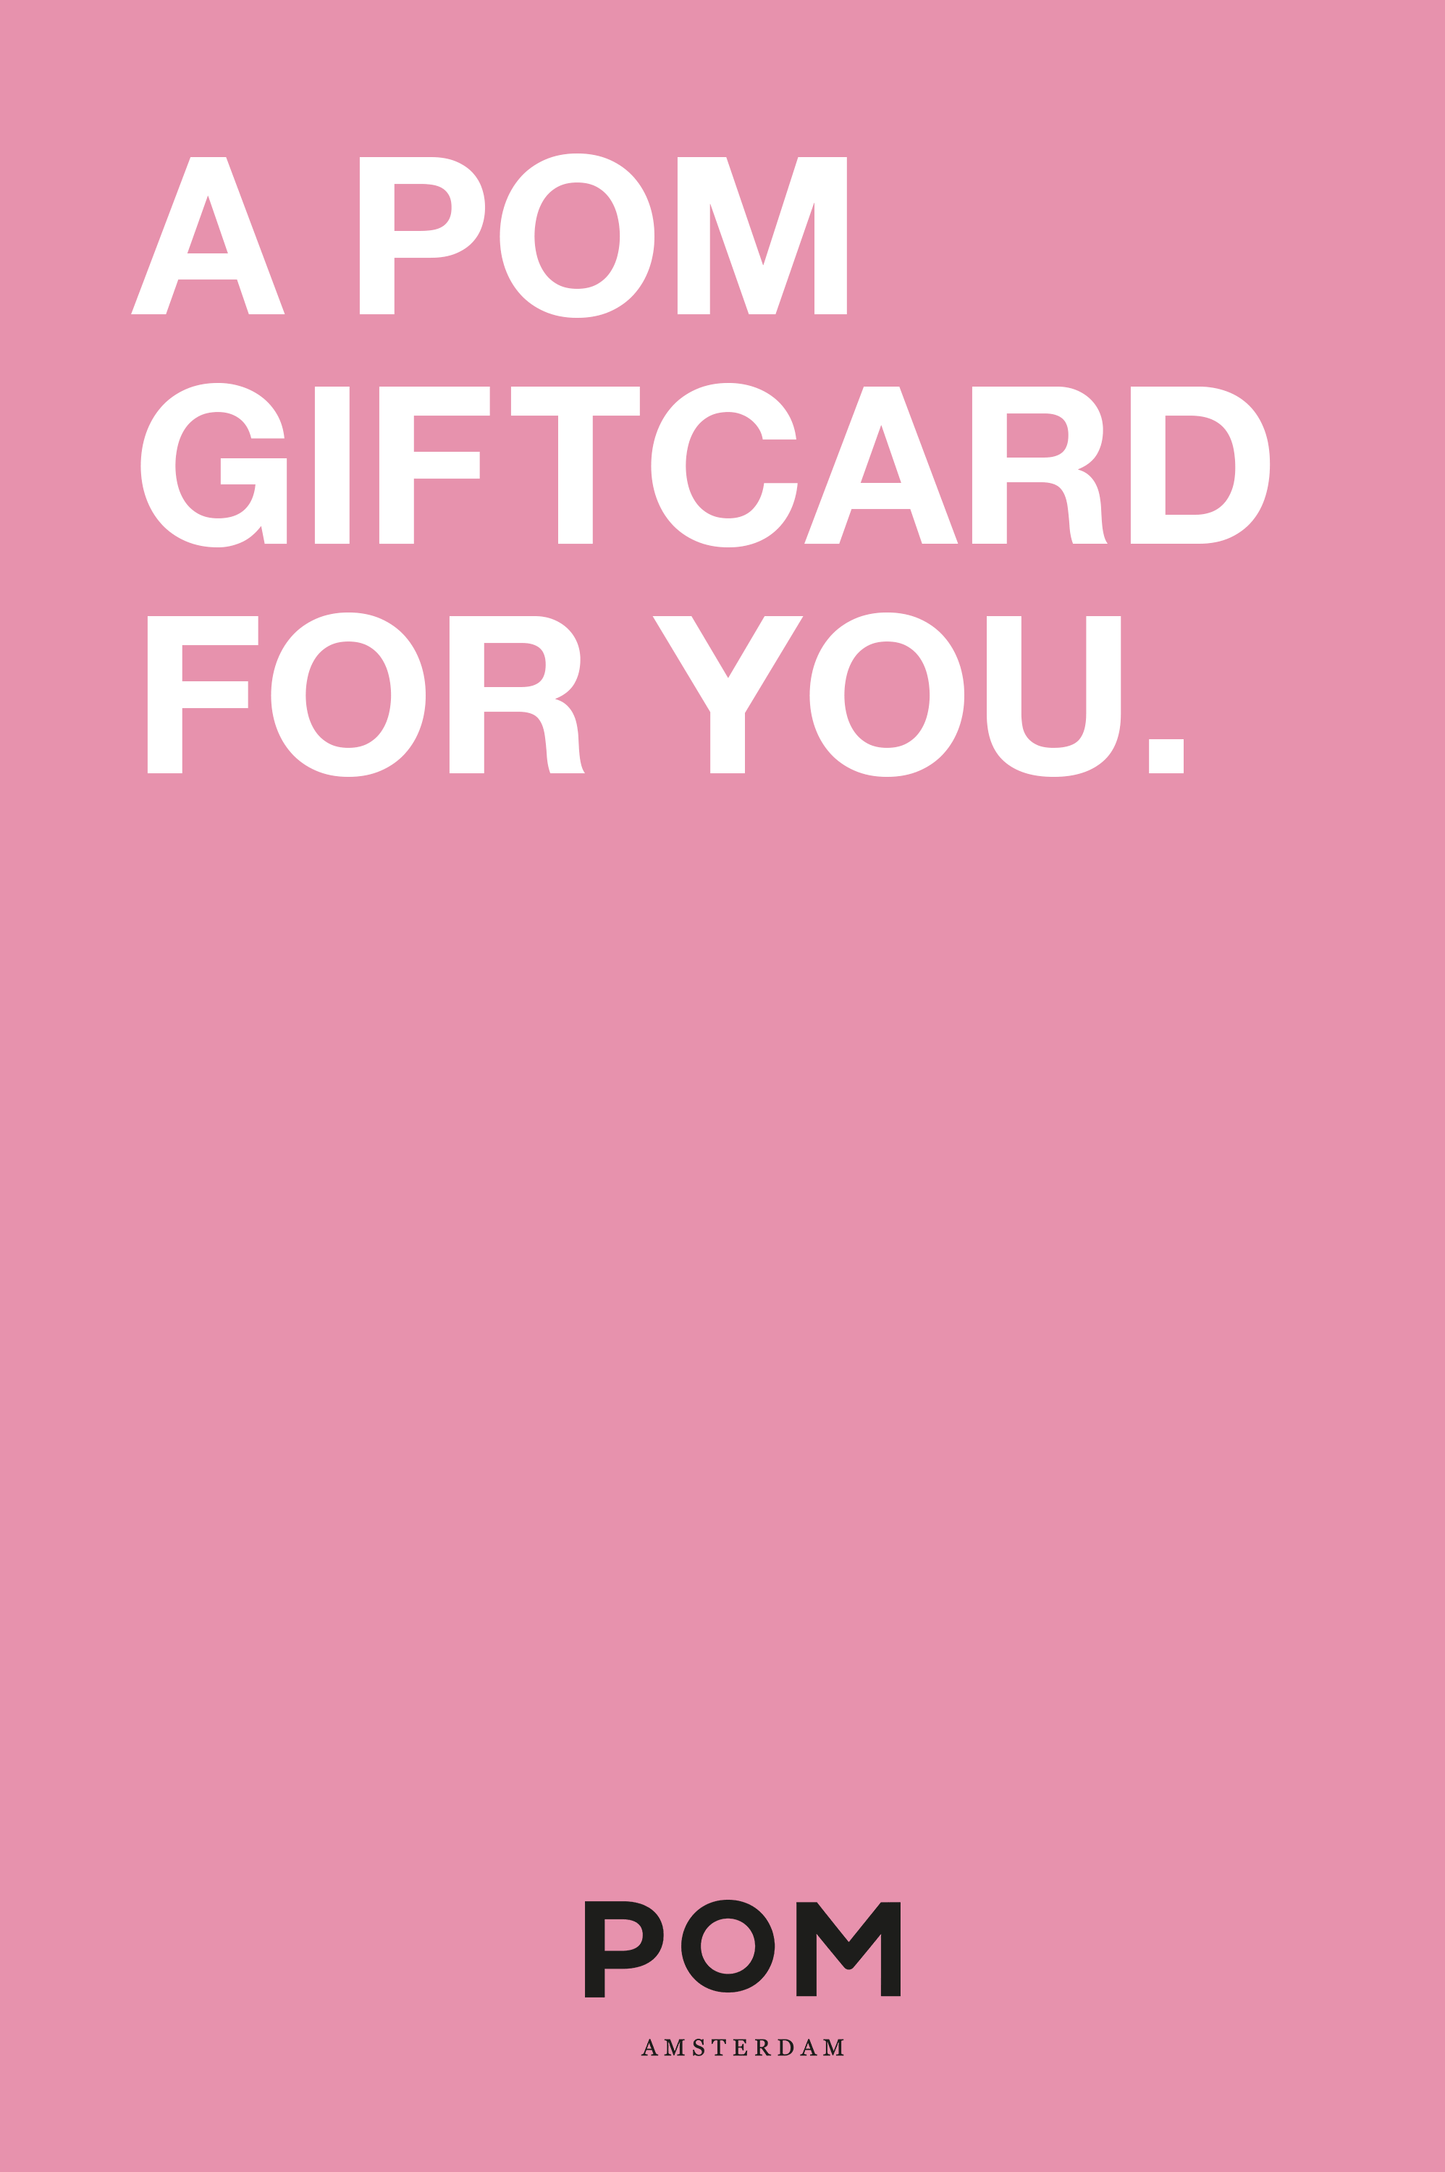 POM Amsterdam Gift Cards Gift card - by email